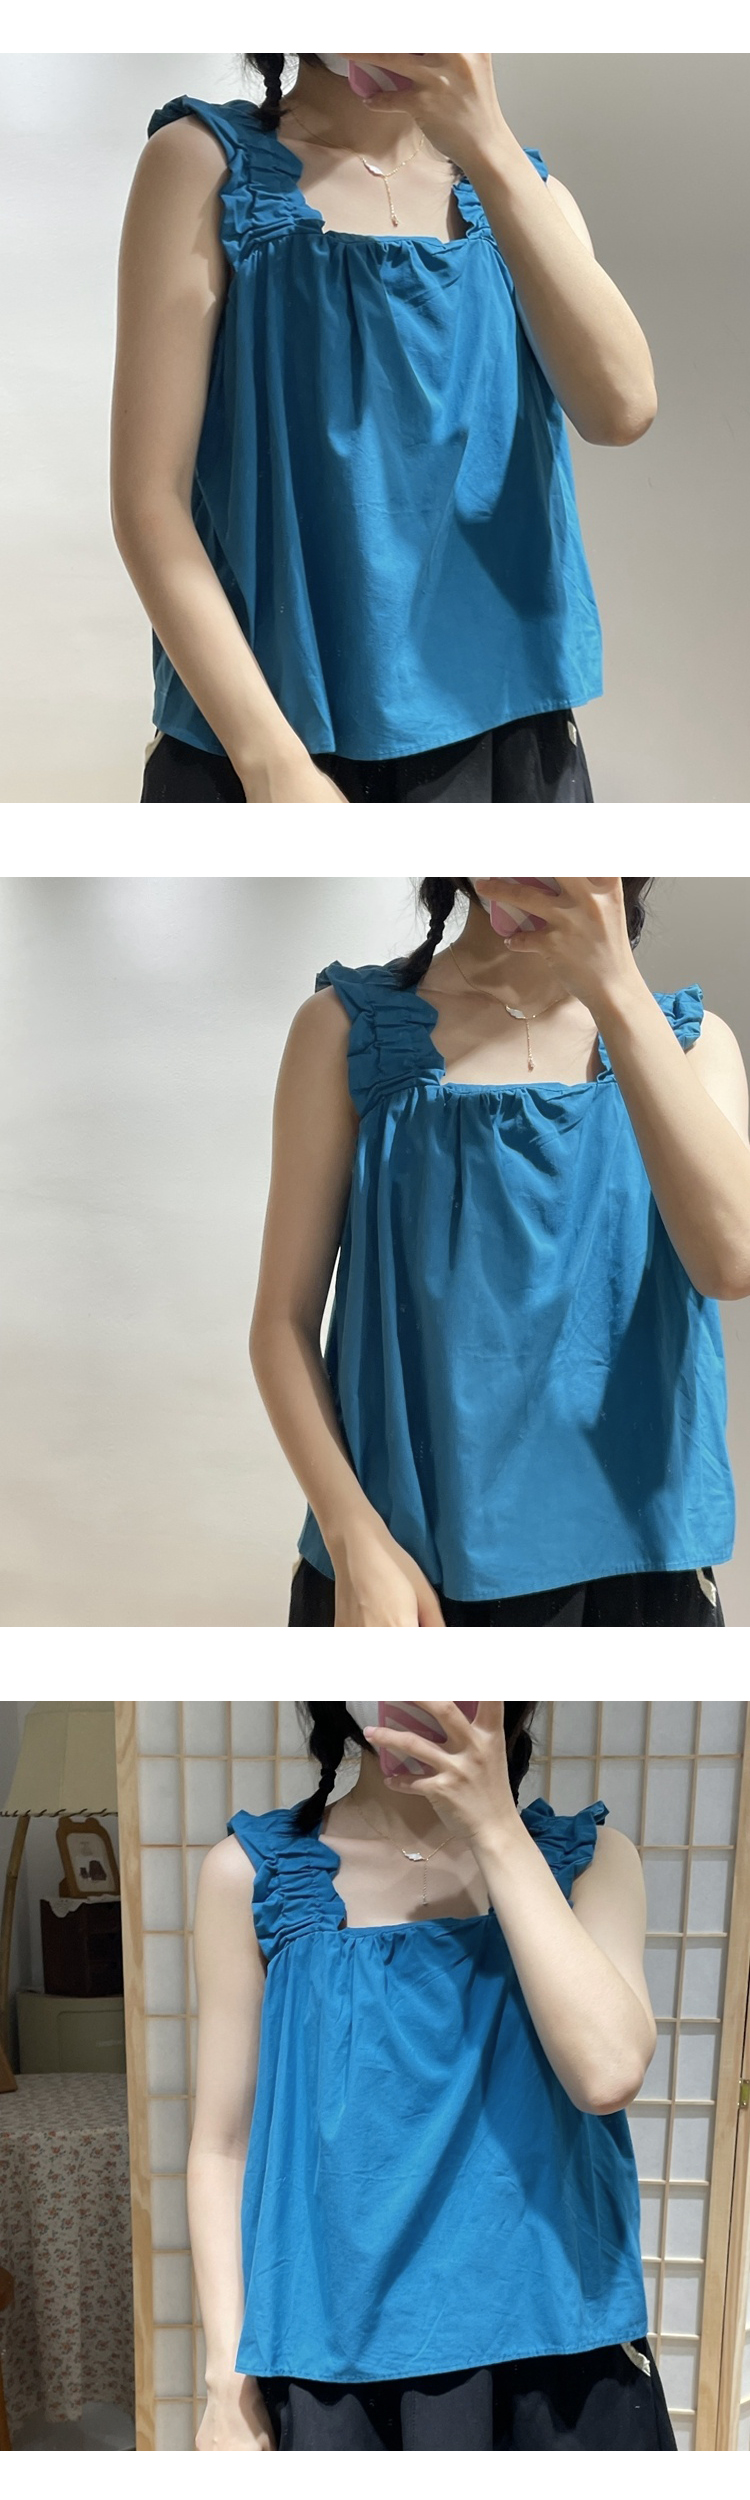 KOIN COLLECTION Square Frill Banding Sleeveless Blouse Blue Color & Free Size 6